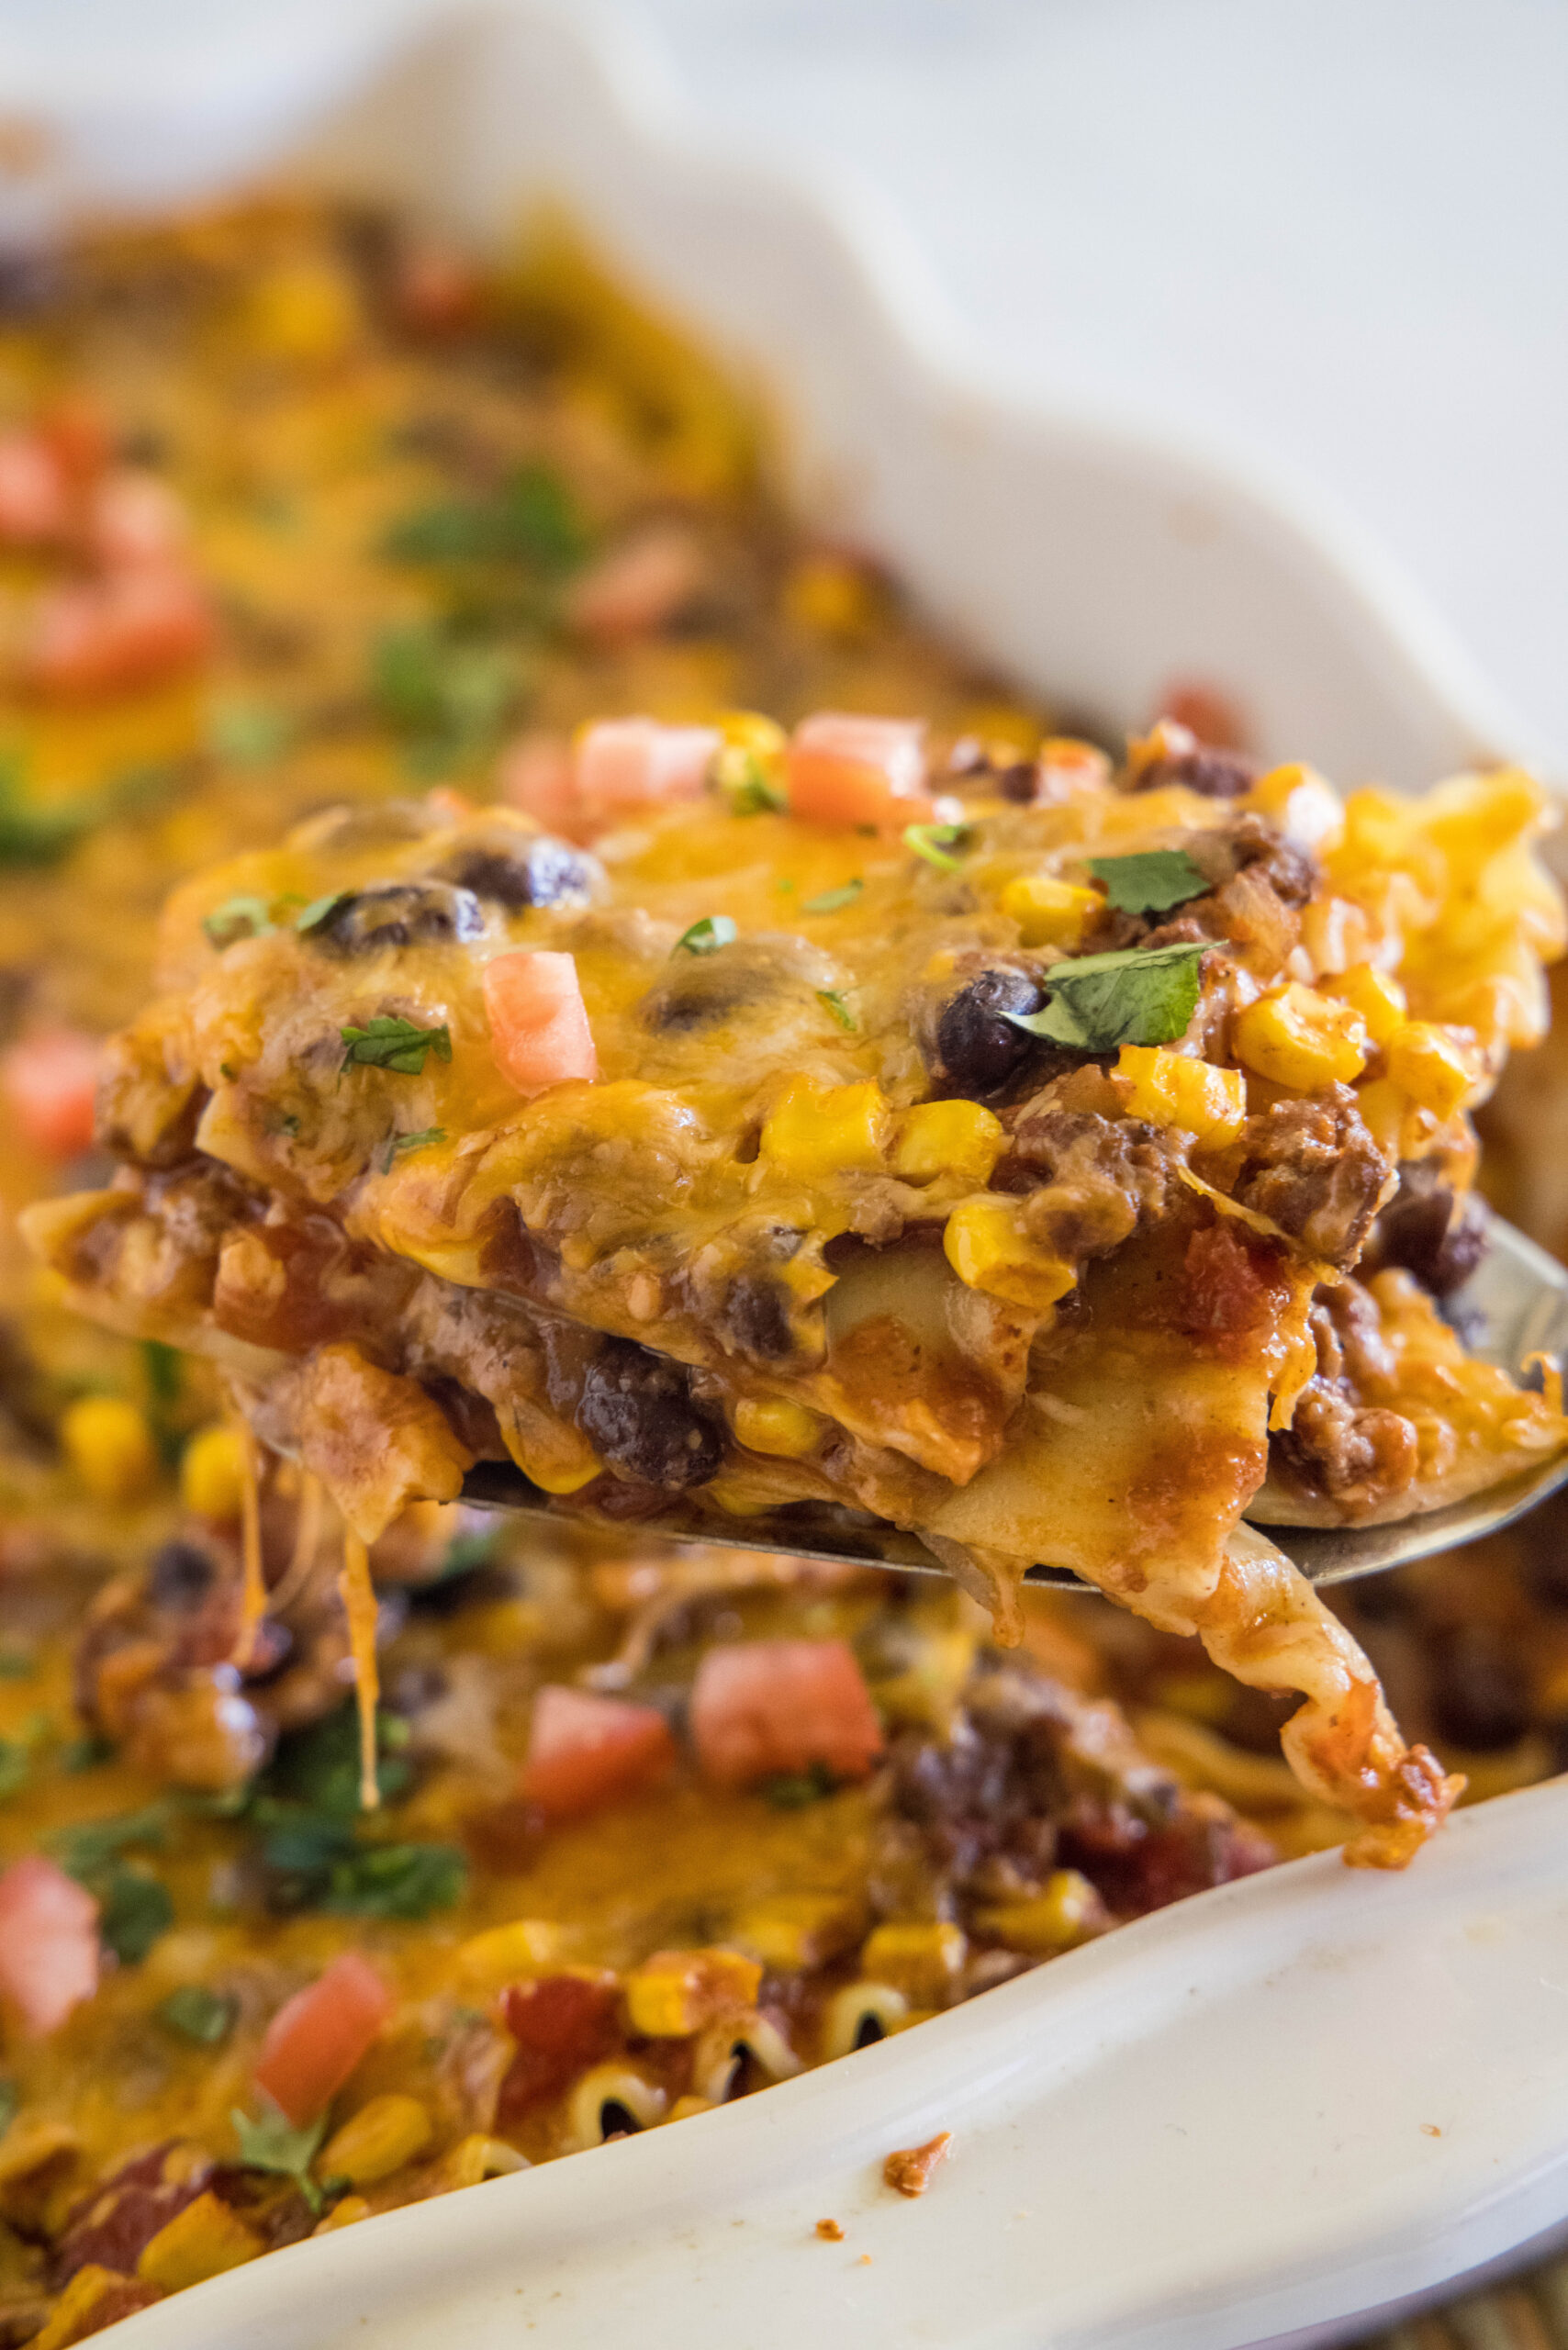 A slice of Mexican lasagna lifted from a ceramic baking dish.